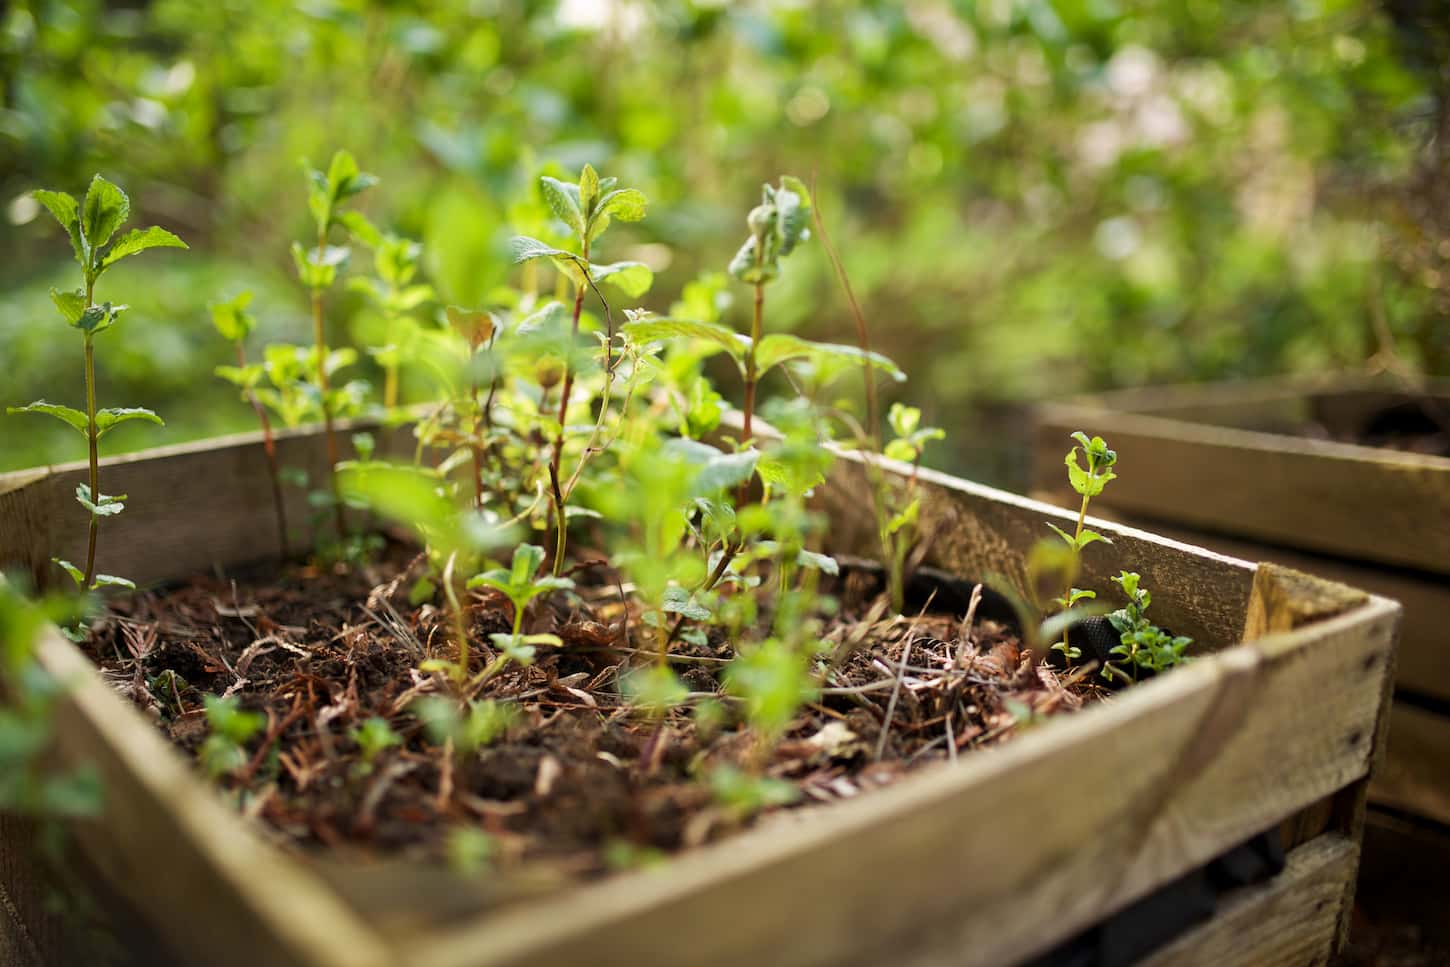 An image of mint plants growing in raised garden beds.